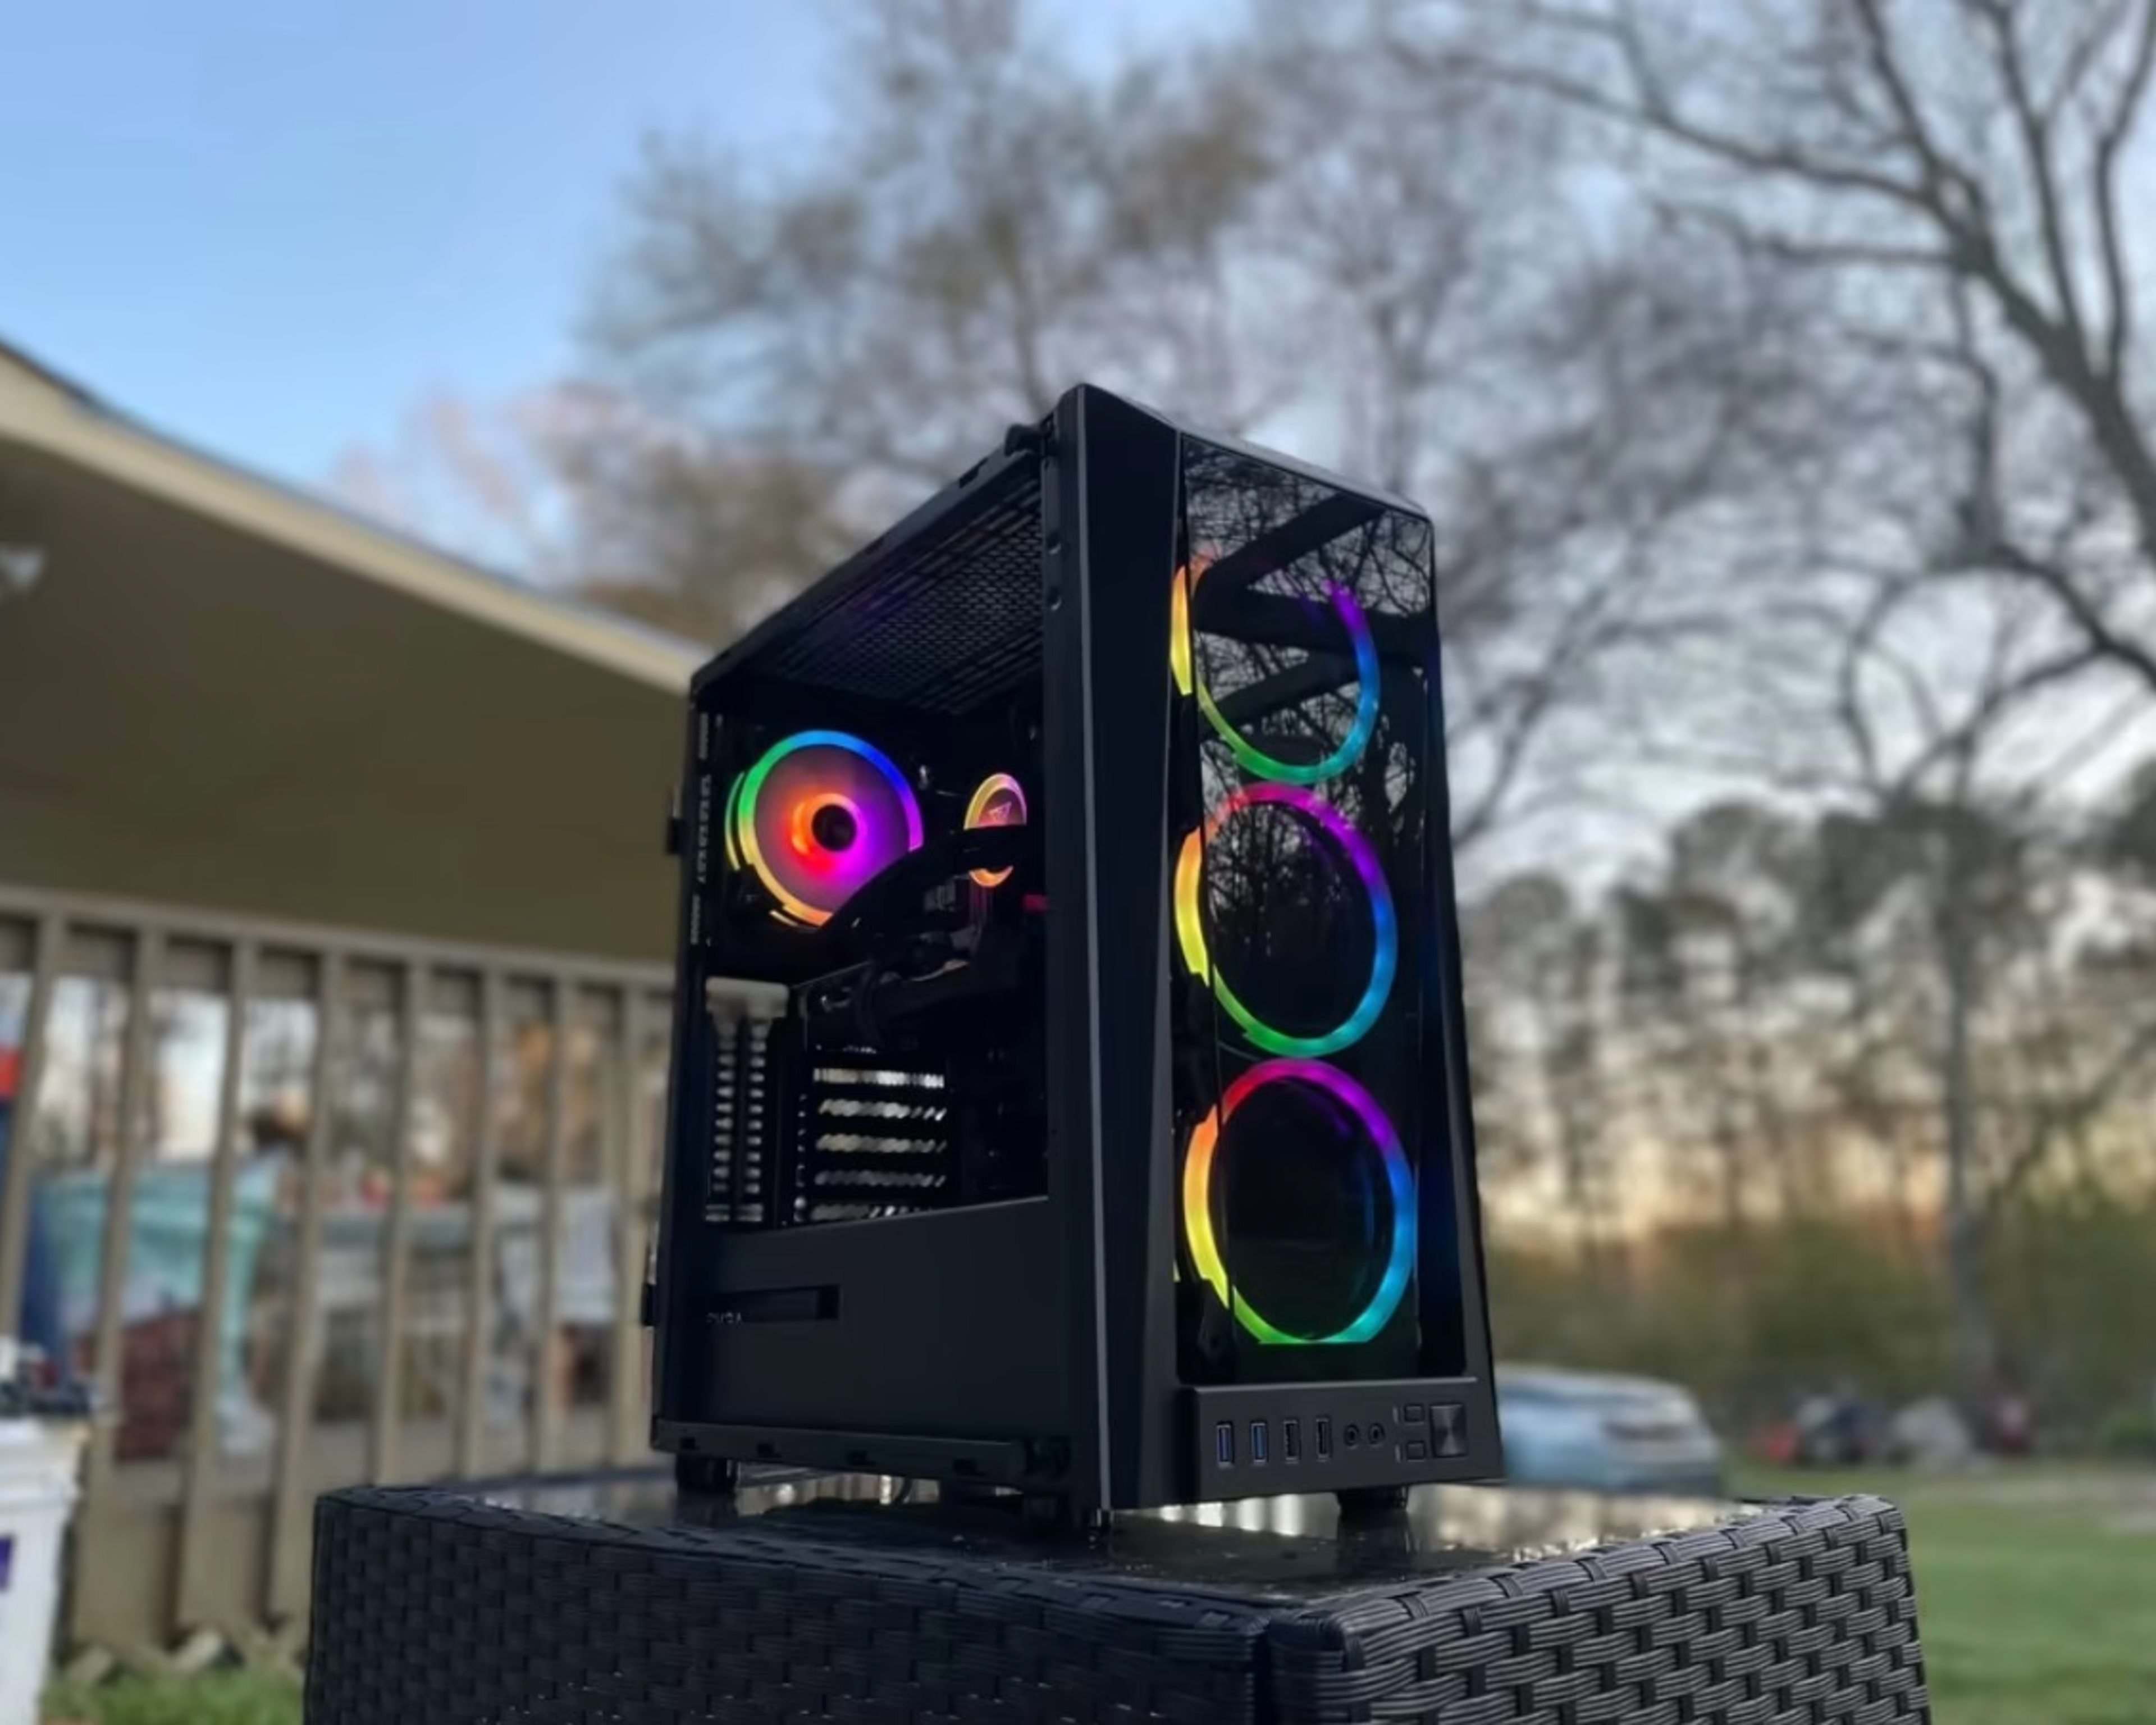 Gaming Pc l Also can Edit, Stream + More!